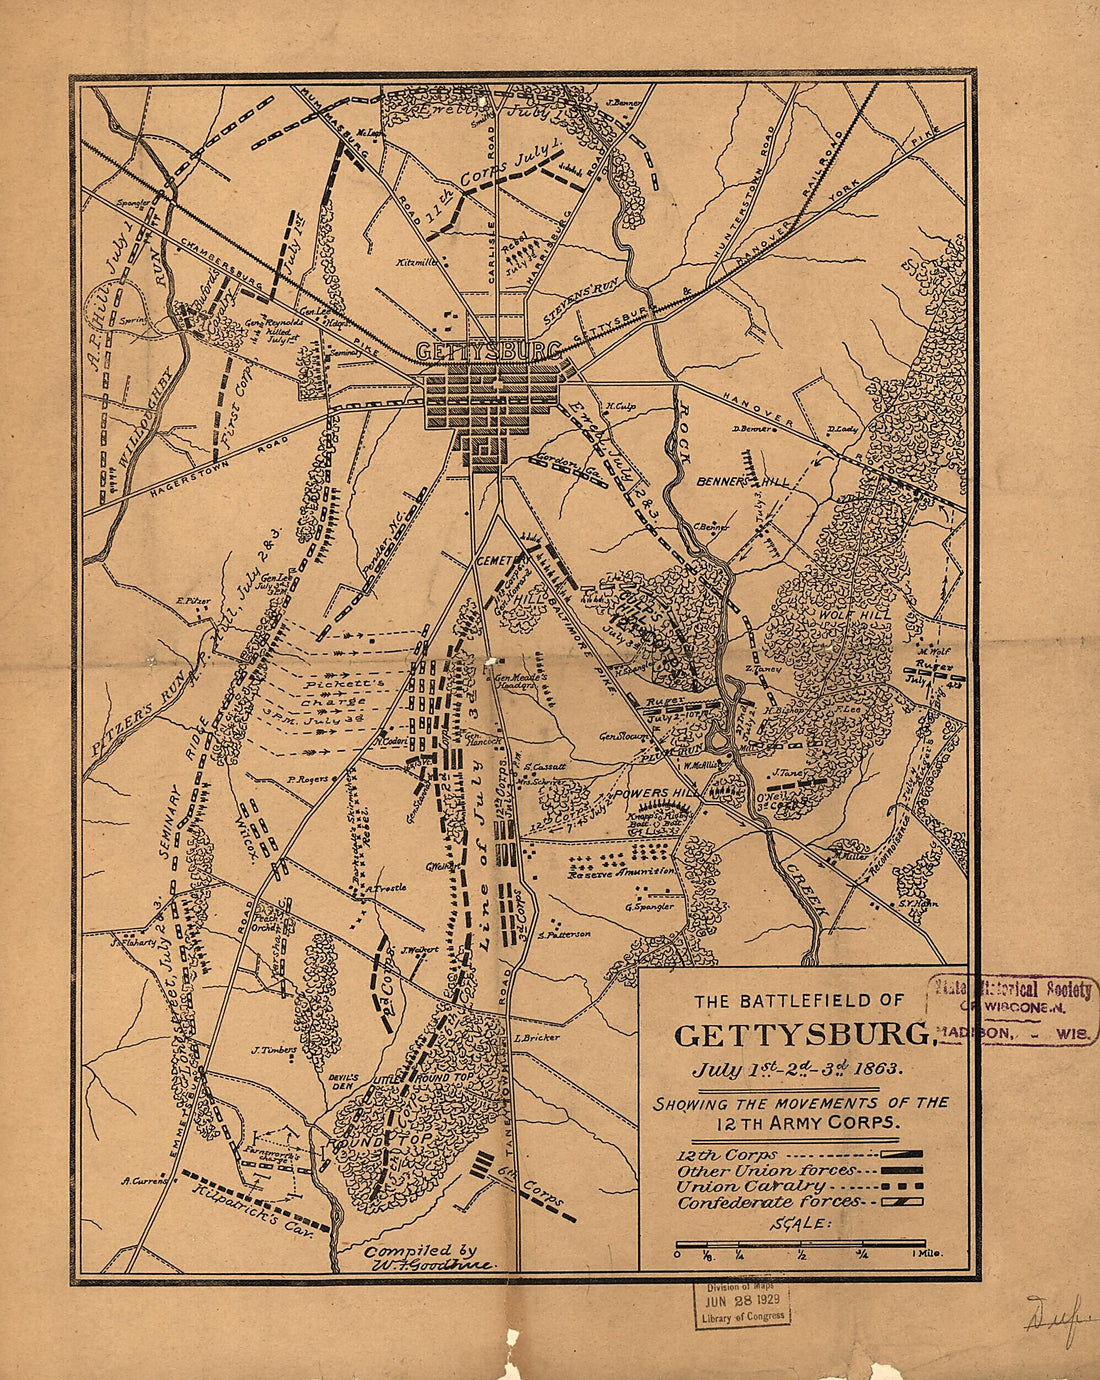 This old map of The Battlefield of Gettysburg, July 1st, 2d, 3d, from 1863, Showing the Movements of the 12th Army Corps was created by W. F. Goodhue in 1863